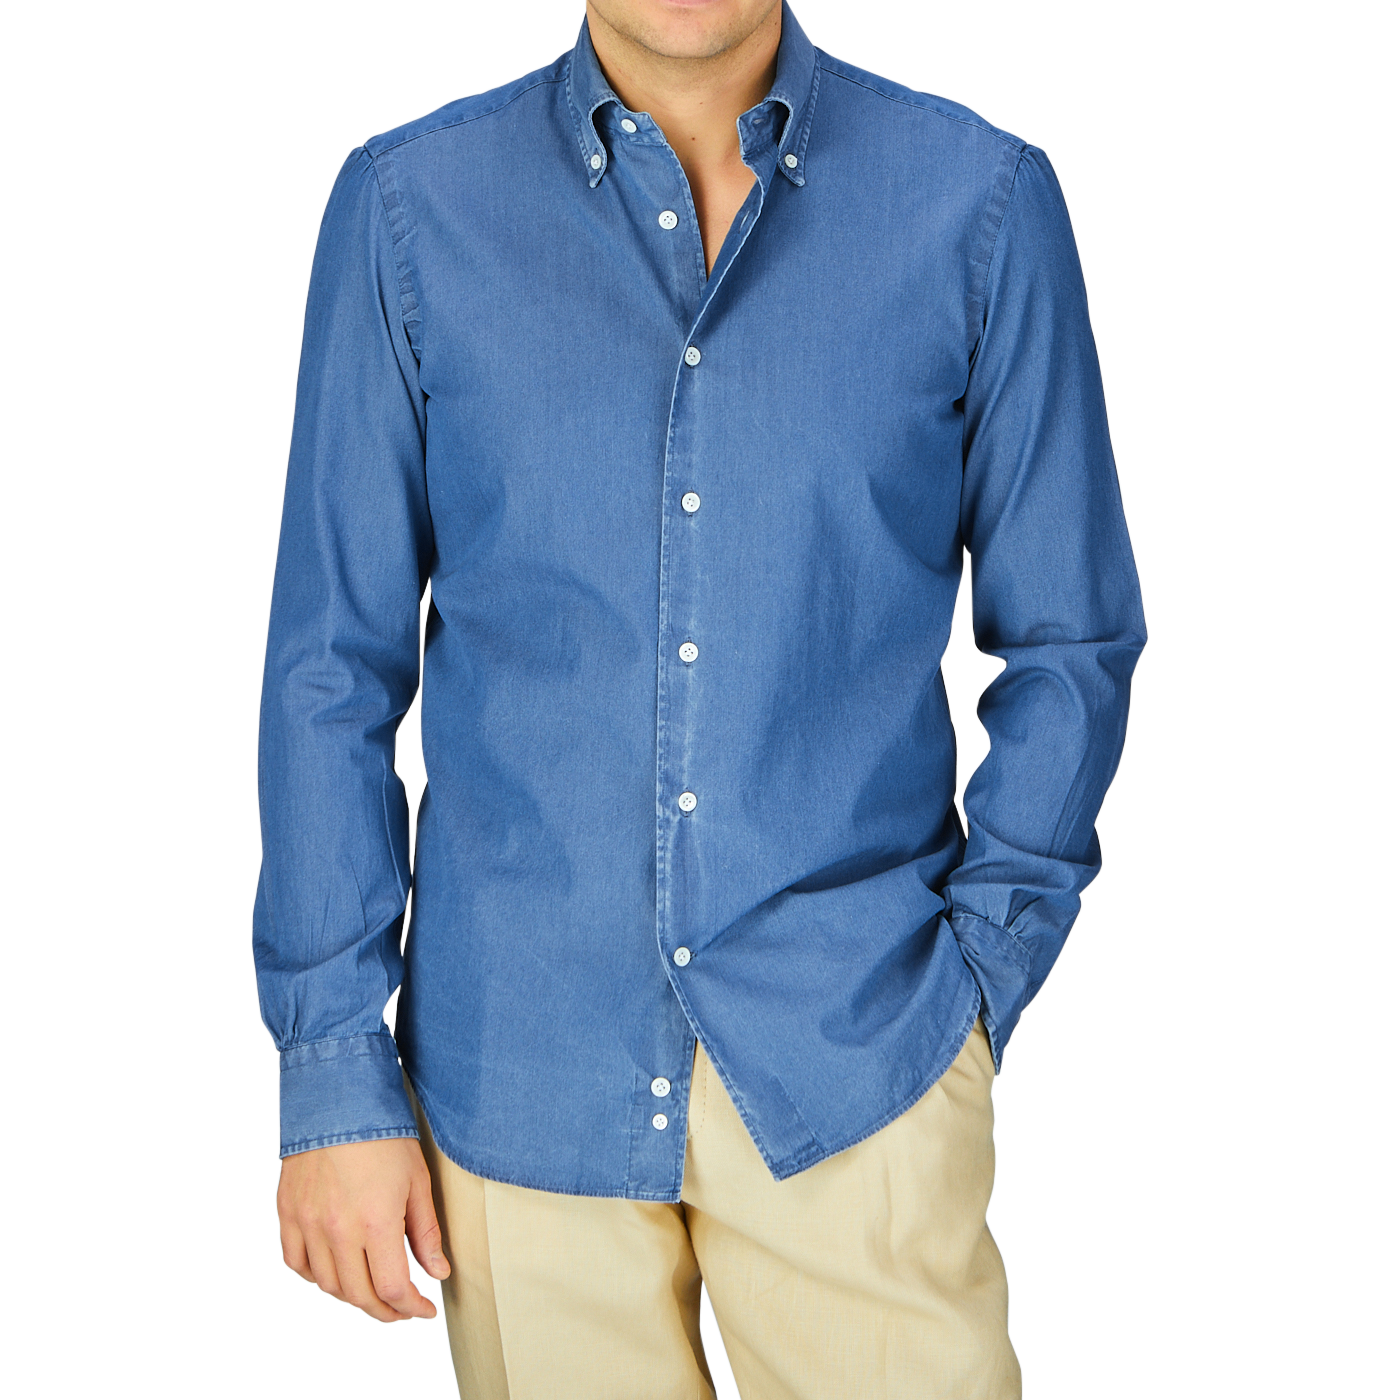 Man wearing a Dark Denim Washed Cotton BD Regular Fit Shirt by Mazzarelli and beige pants.